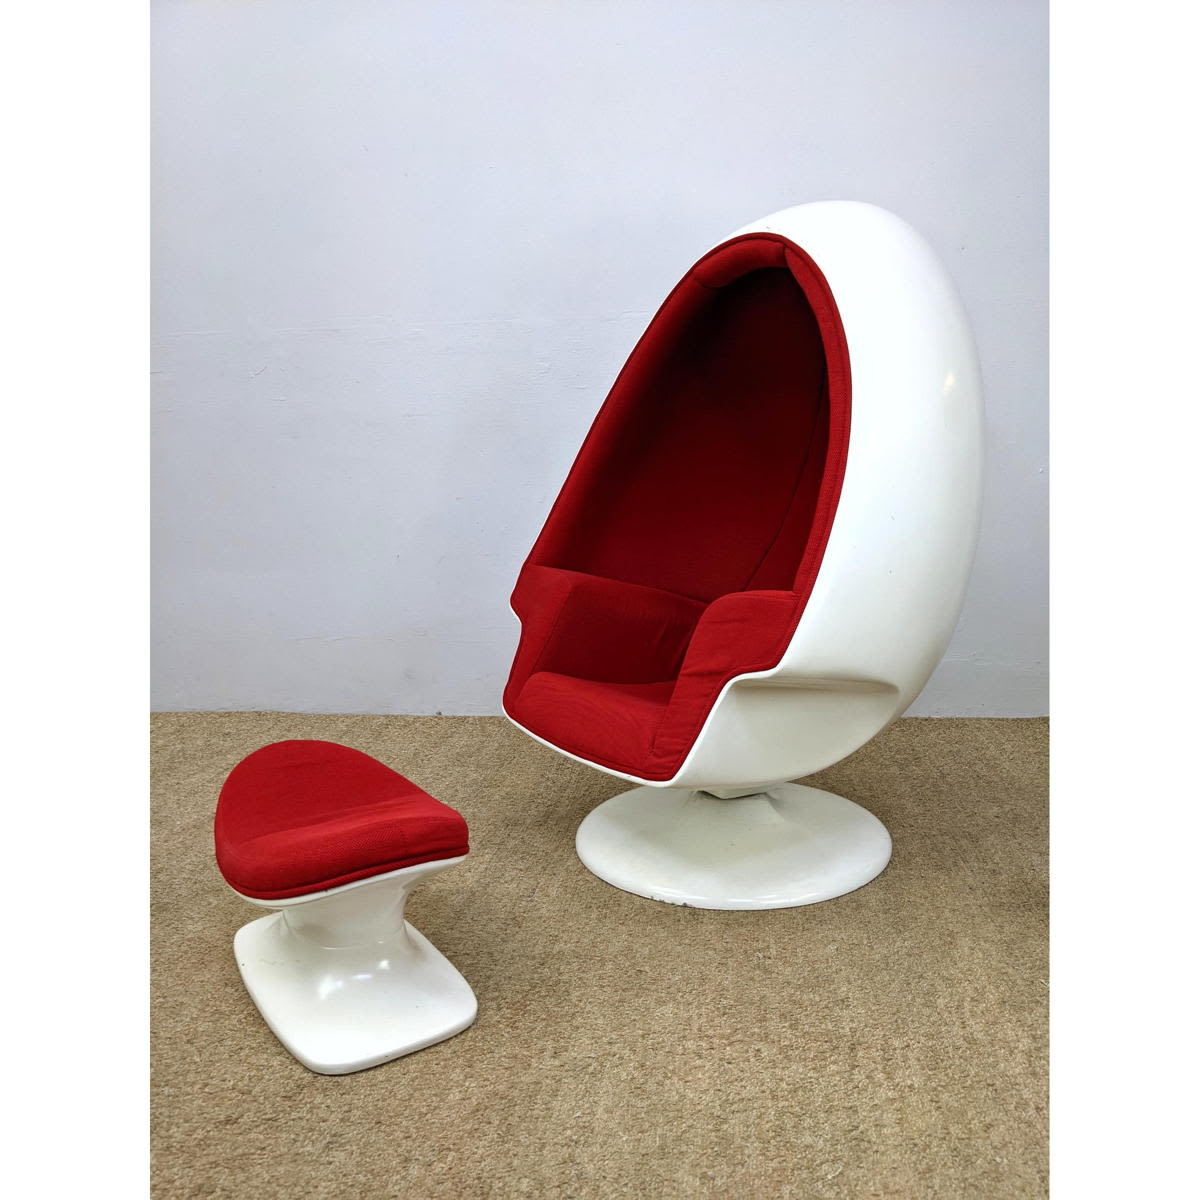 Large Egg Chair and Ottoman. White